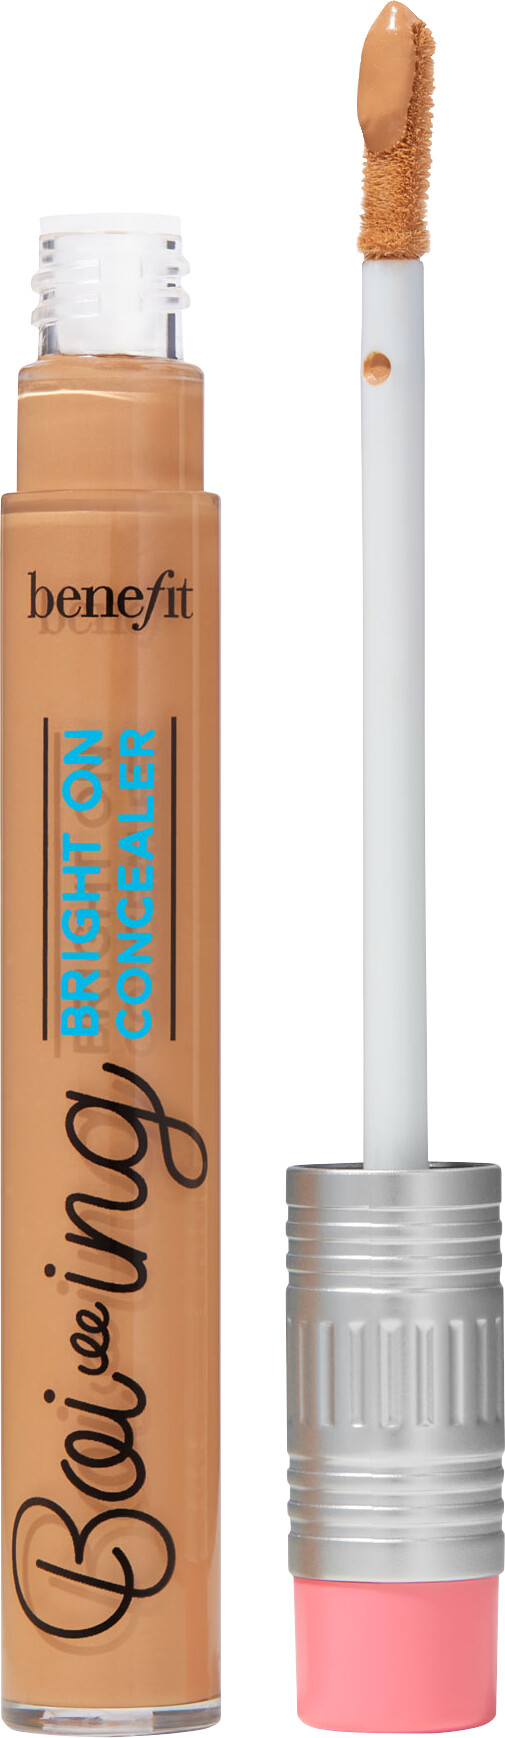 Benefit Boi-ing Bright On Concealer 5ml Apricot